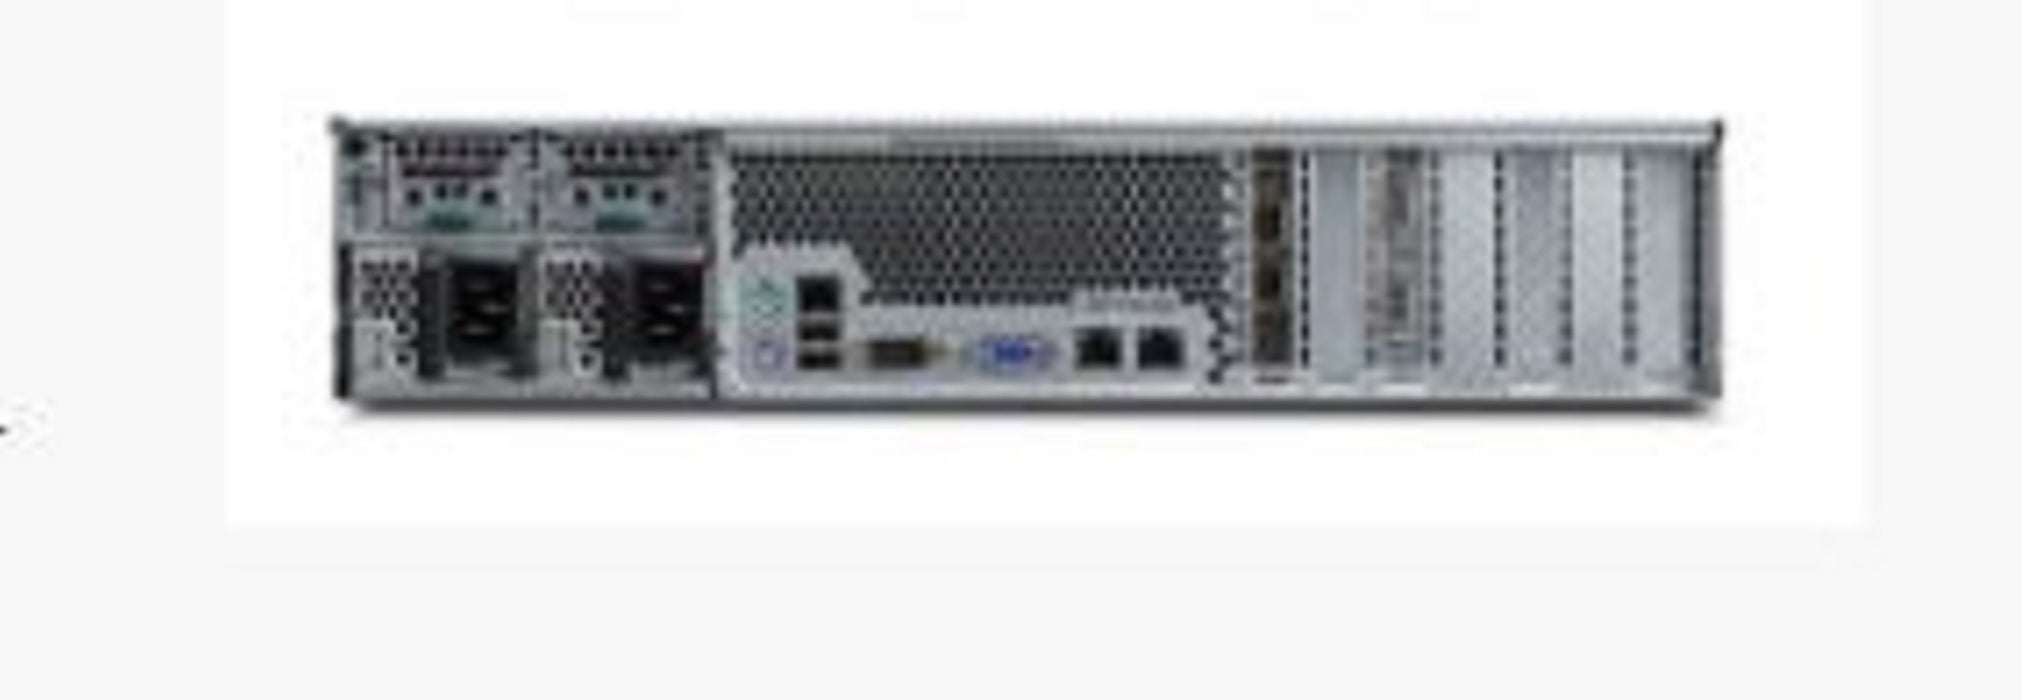 Isilon X200 24TB 4-Node Cluster with 2 x 8-Port Infiniband switches